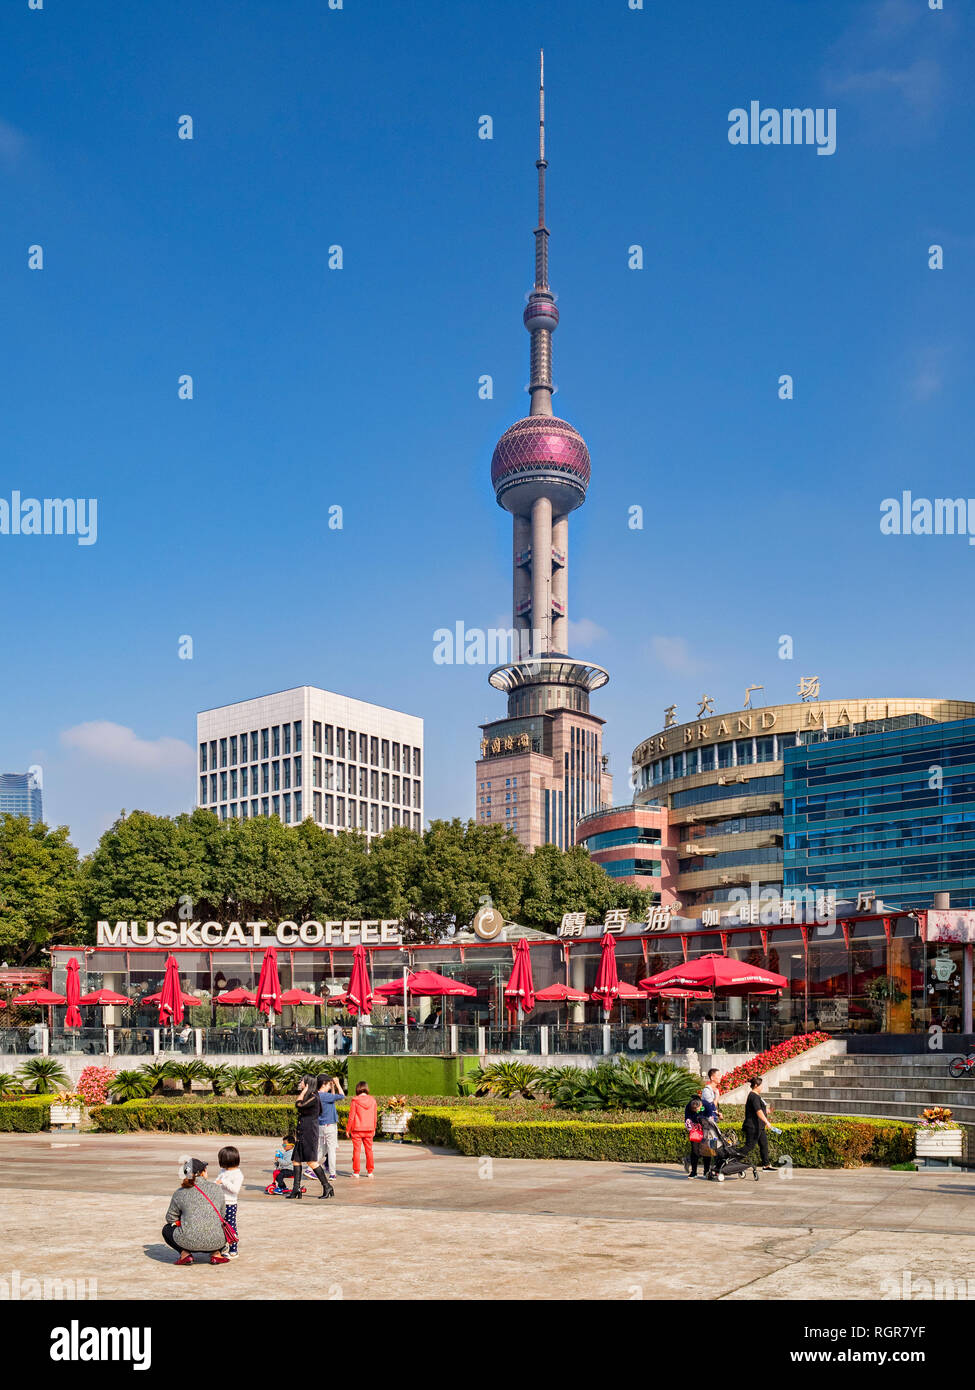 1 December 2018: Shanghai, China - Cafe on the East bank of the Huangpu River, Pudong, Shanghai, with a skyline dominated by the Oriental Pearl Tower. Stock Photo